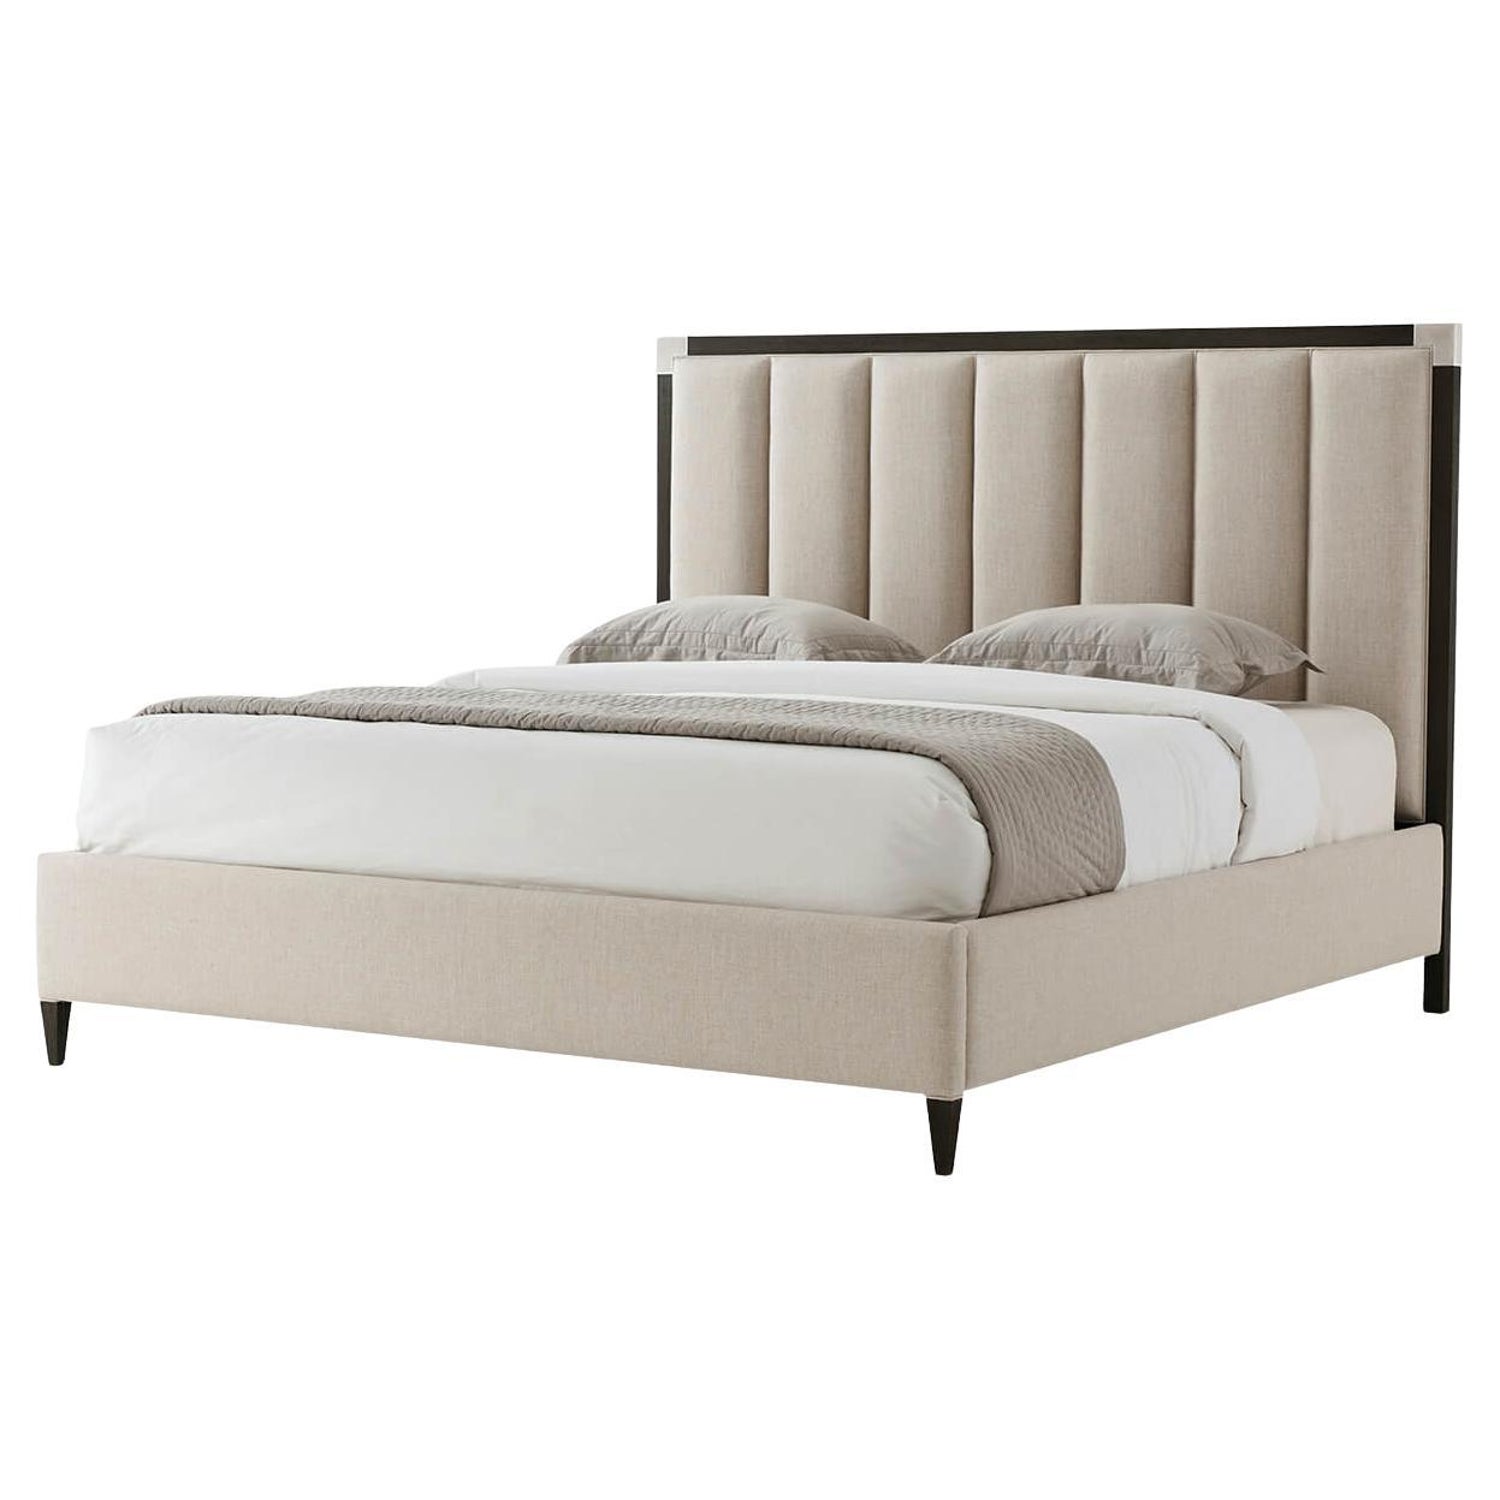 Art Deco Style King Size Bed For, Art Deco King Bed